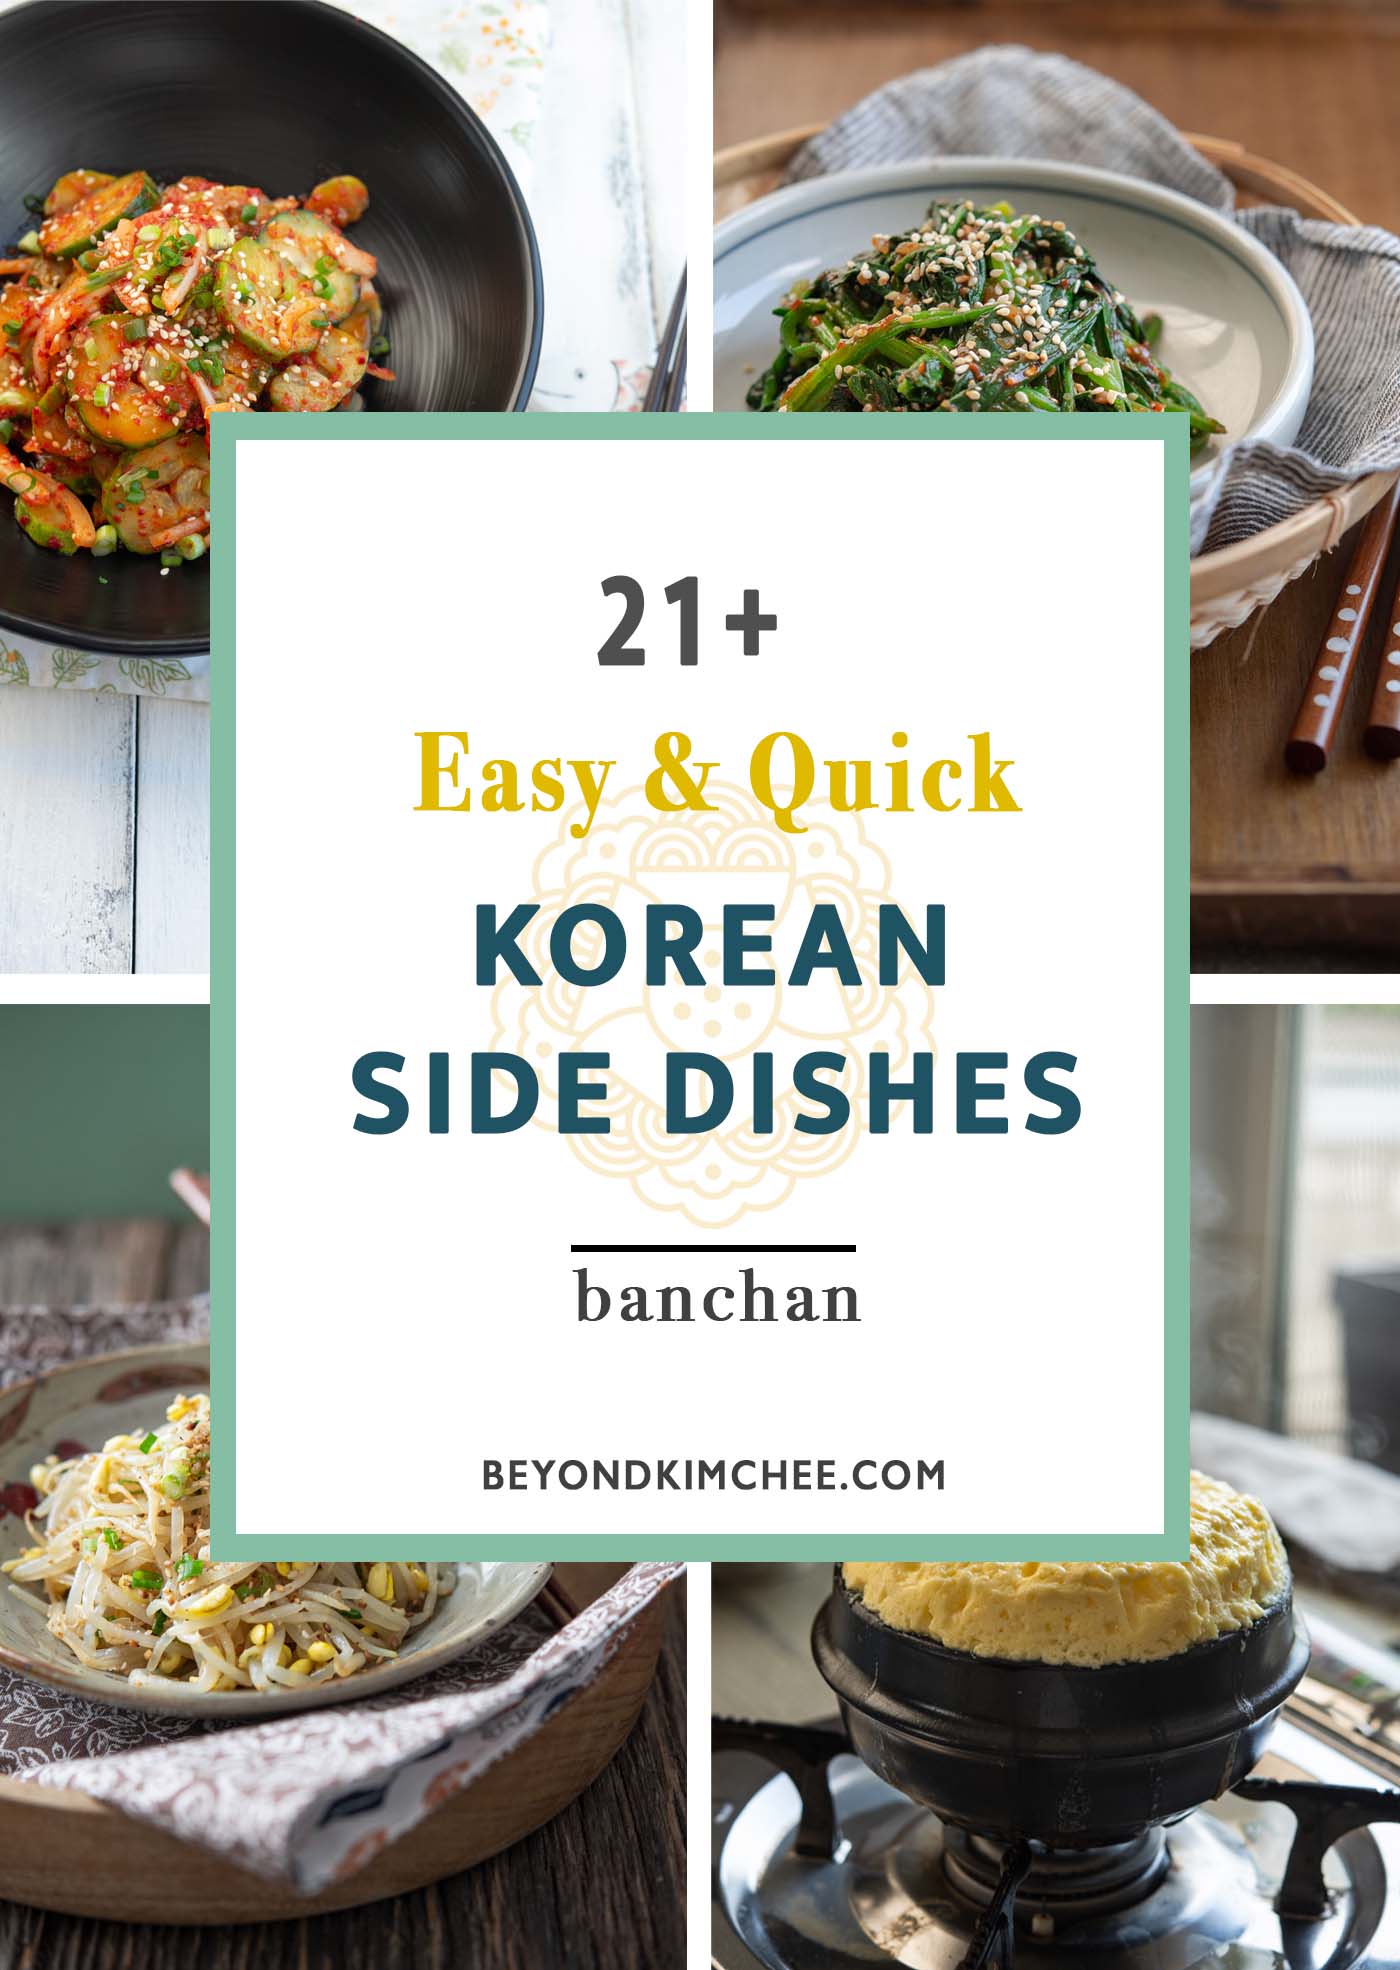 21 Korean side dishes, Banchan, recipes are collected as a roundup.